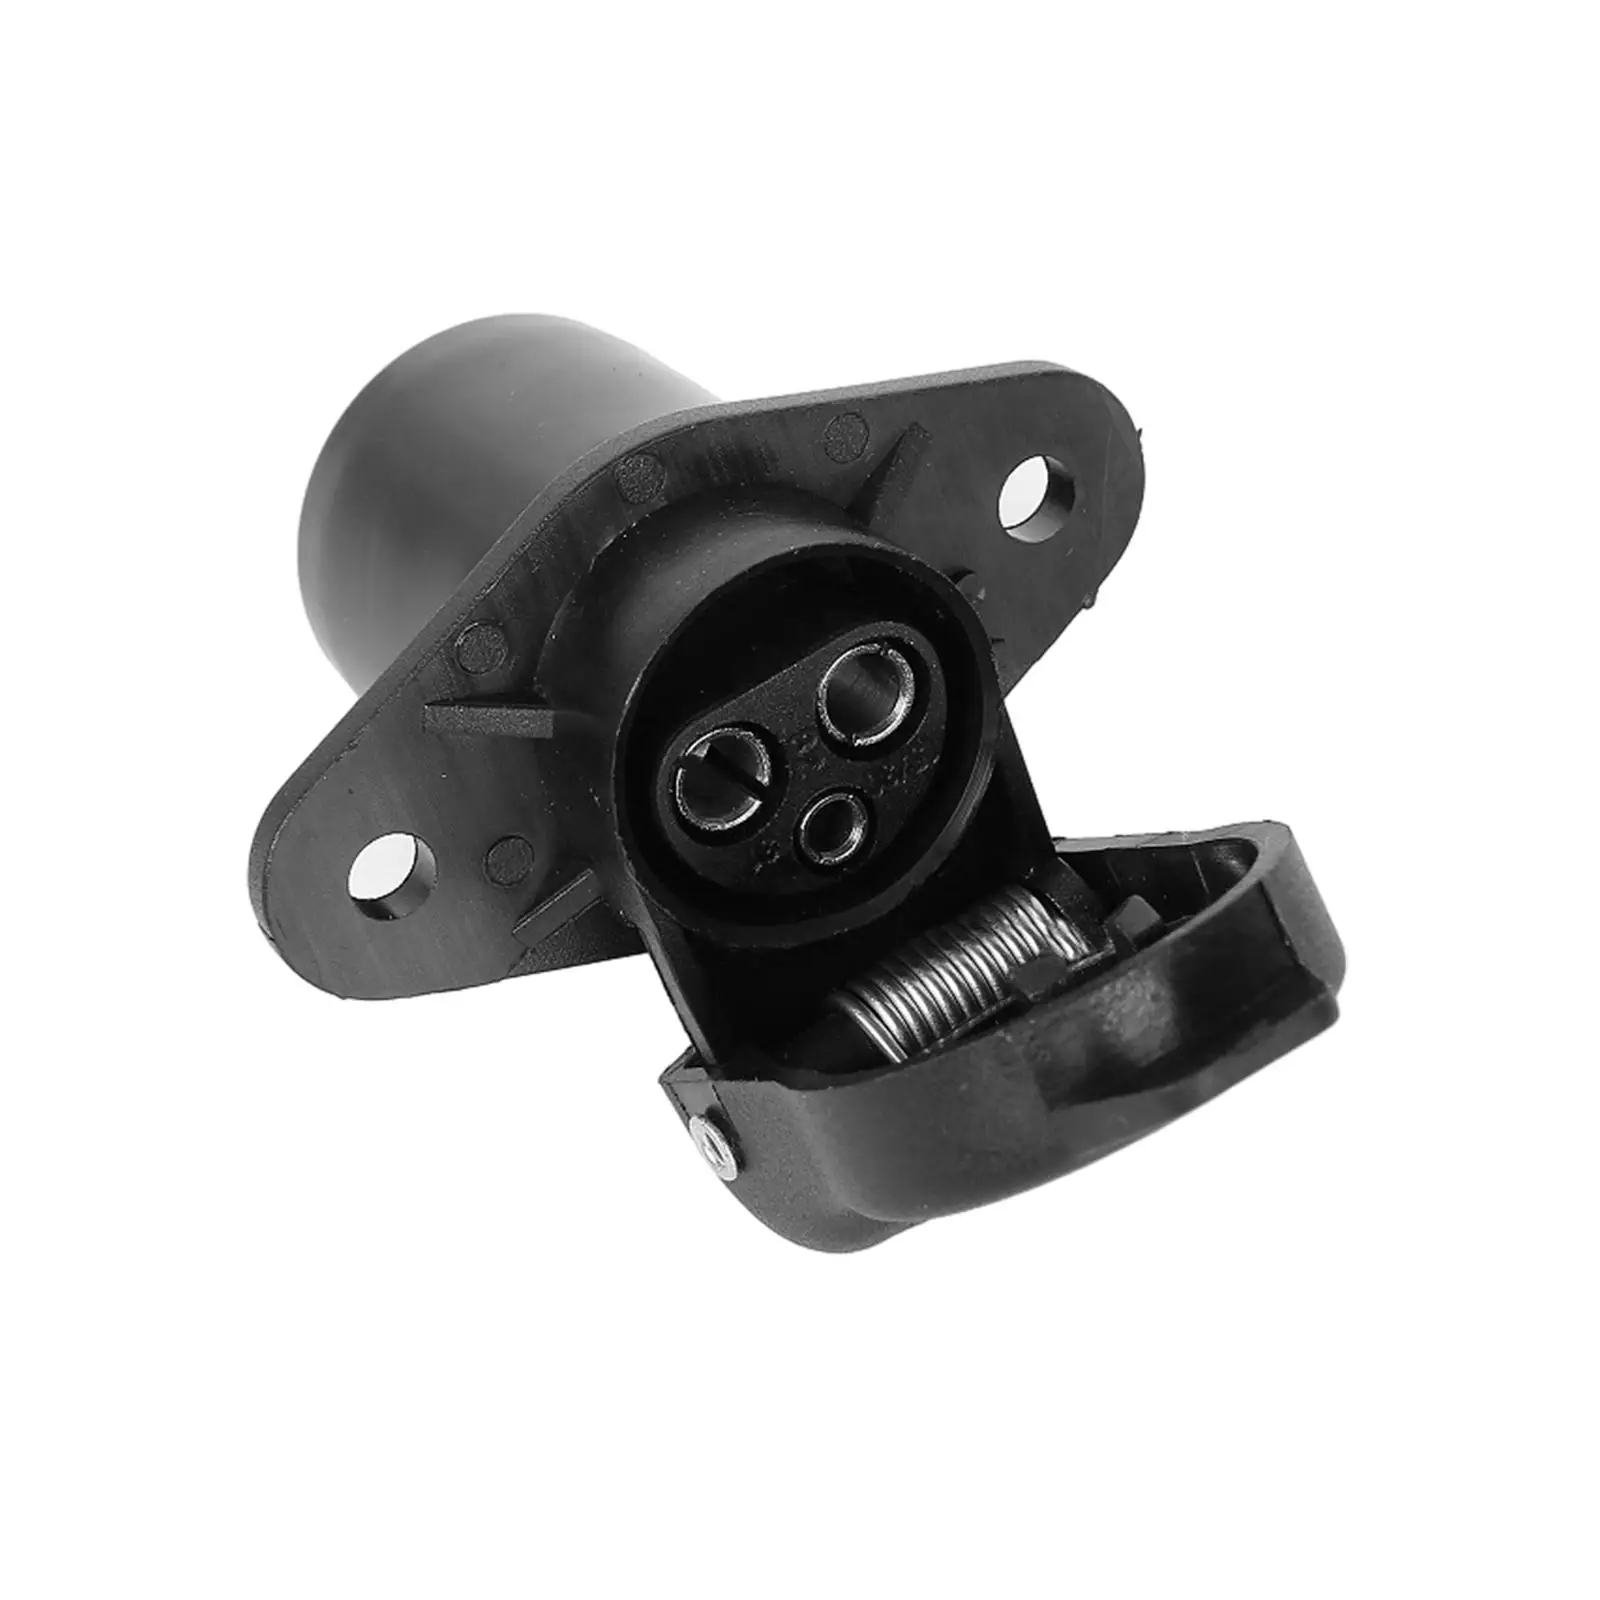 Plug Socket Trailer Connector RV 12V Accessories Round Towing for Commercial Vehicle Van Boat Auto Electrical Caravan Truck